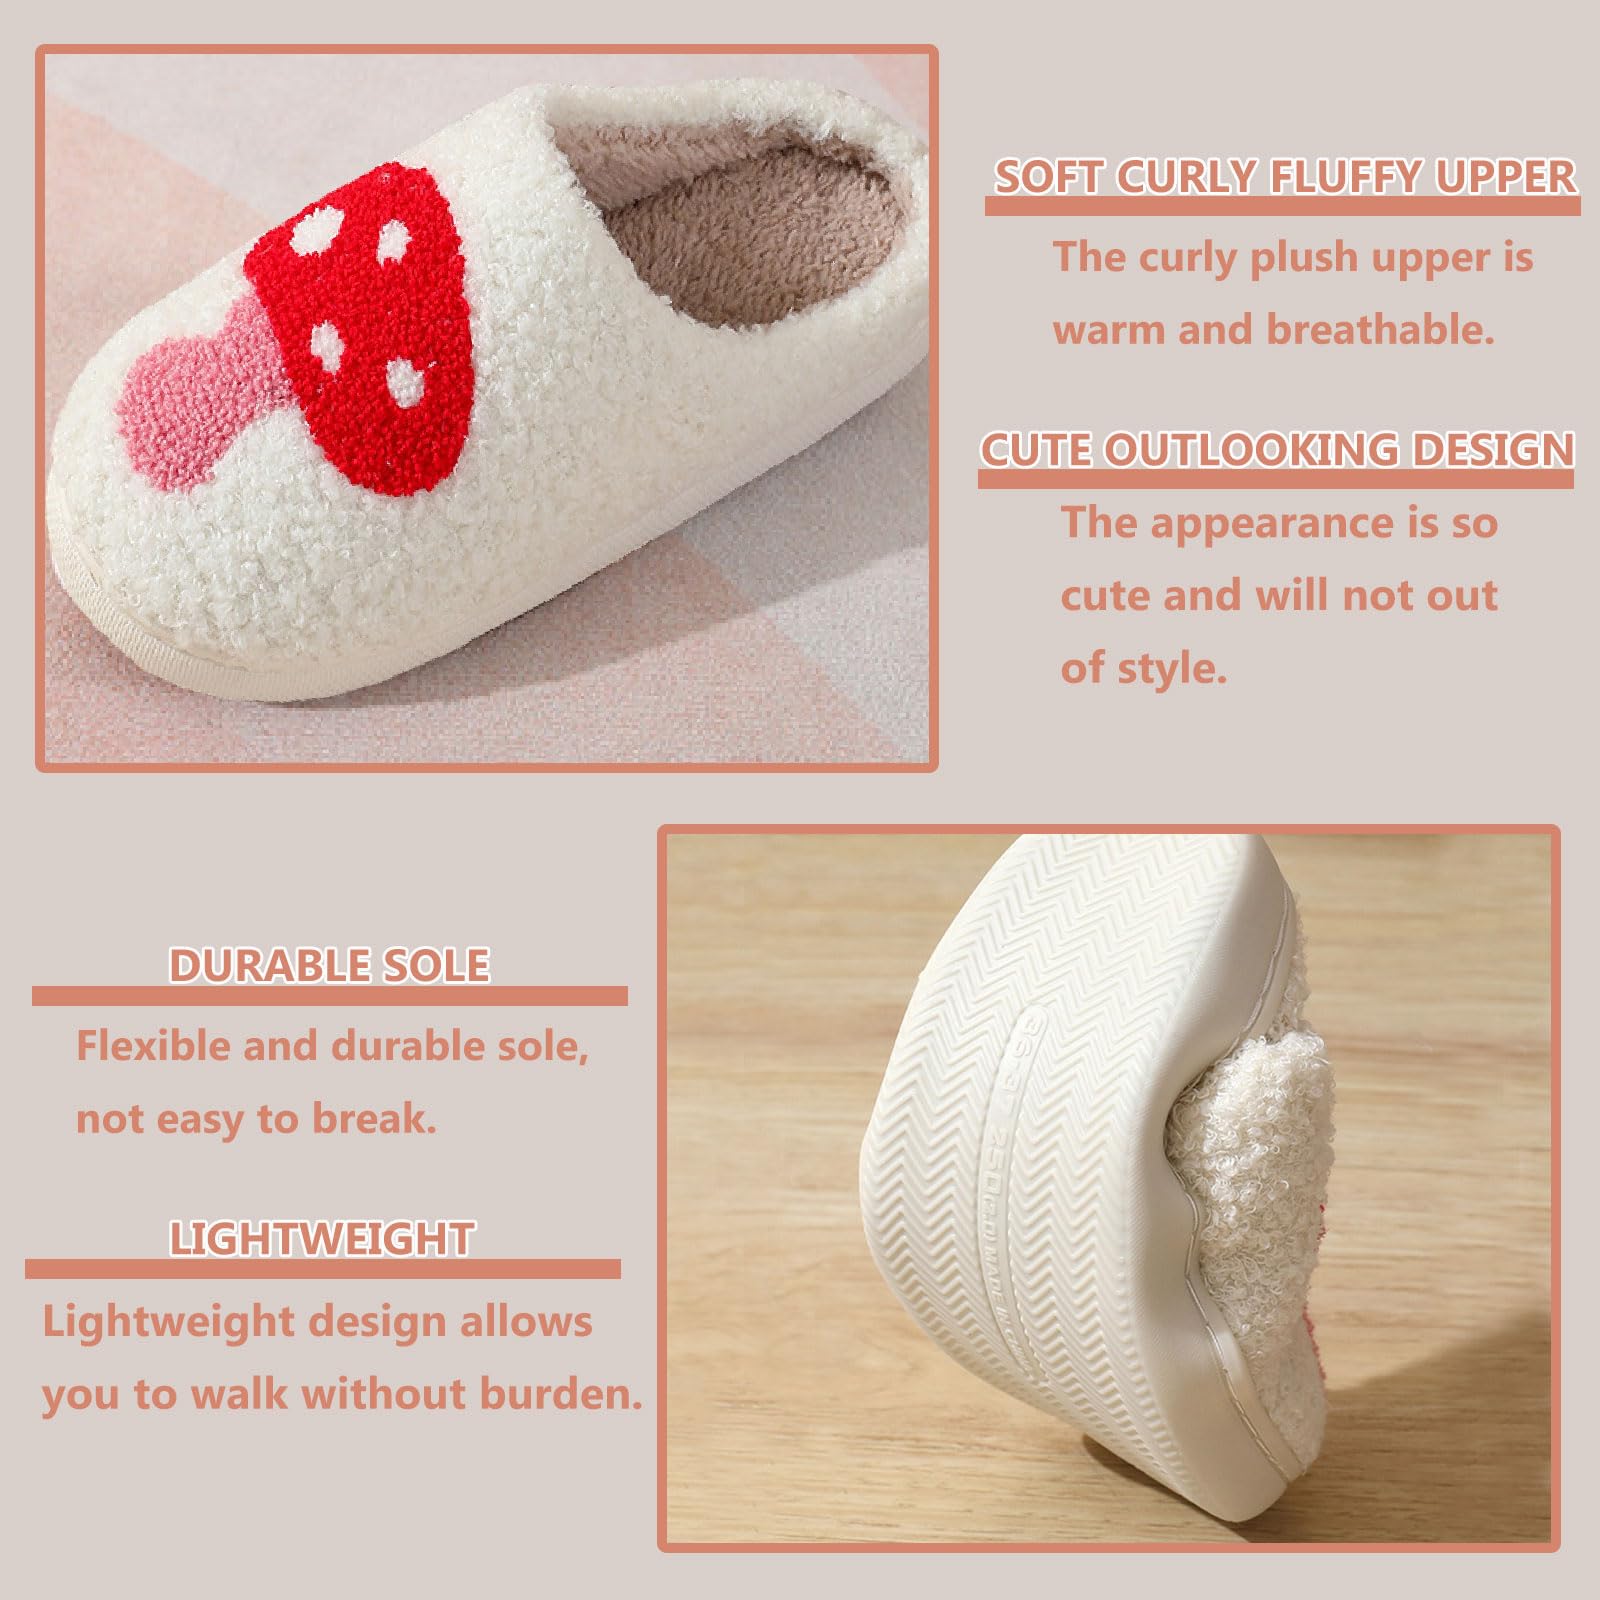 V OPXIN Valentines Slippers for Womens Mens Cute Slippers Cozy Plush Warm Slip-on House Shoes for Indoor and Outdoor Strawberry Mushroom Evil Eyes Love Heart Slippers Valentine's Day Gifts